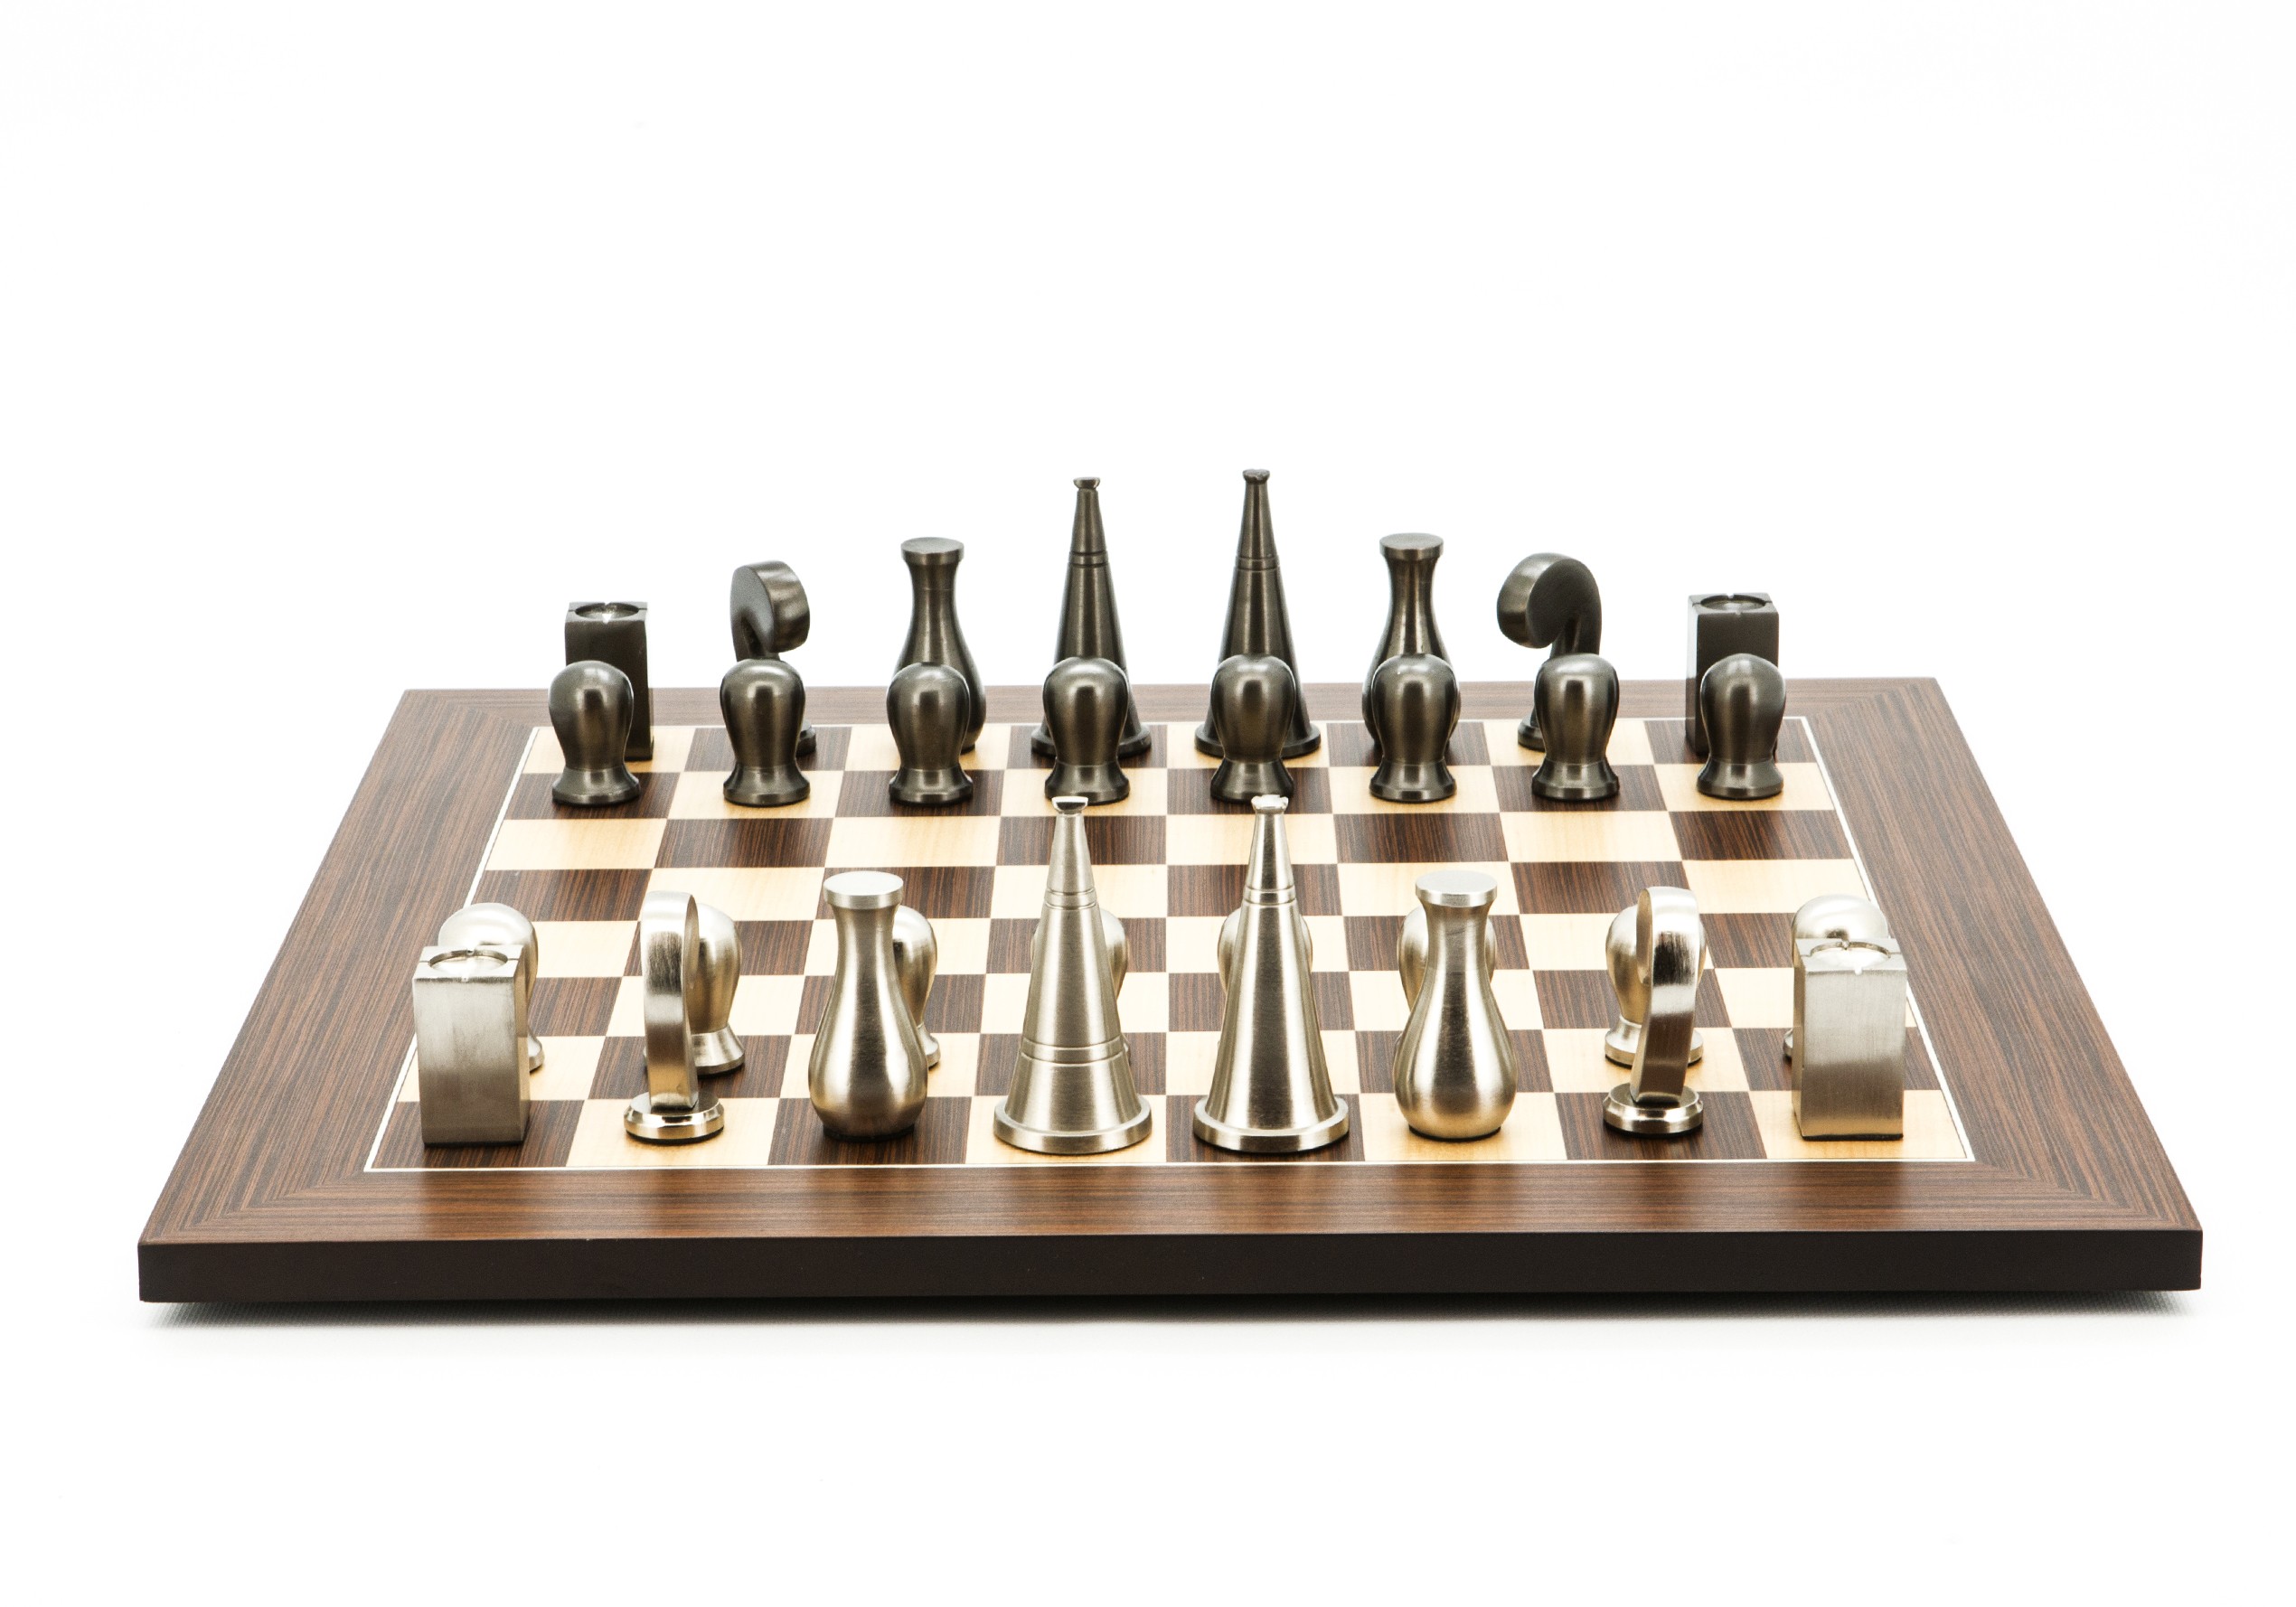 Dal Rossi Italy Chess Set Palisander / Maple Flat Board 50cm, With Metal Dark Titanium and Silver 90mm Chessmen